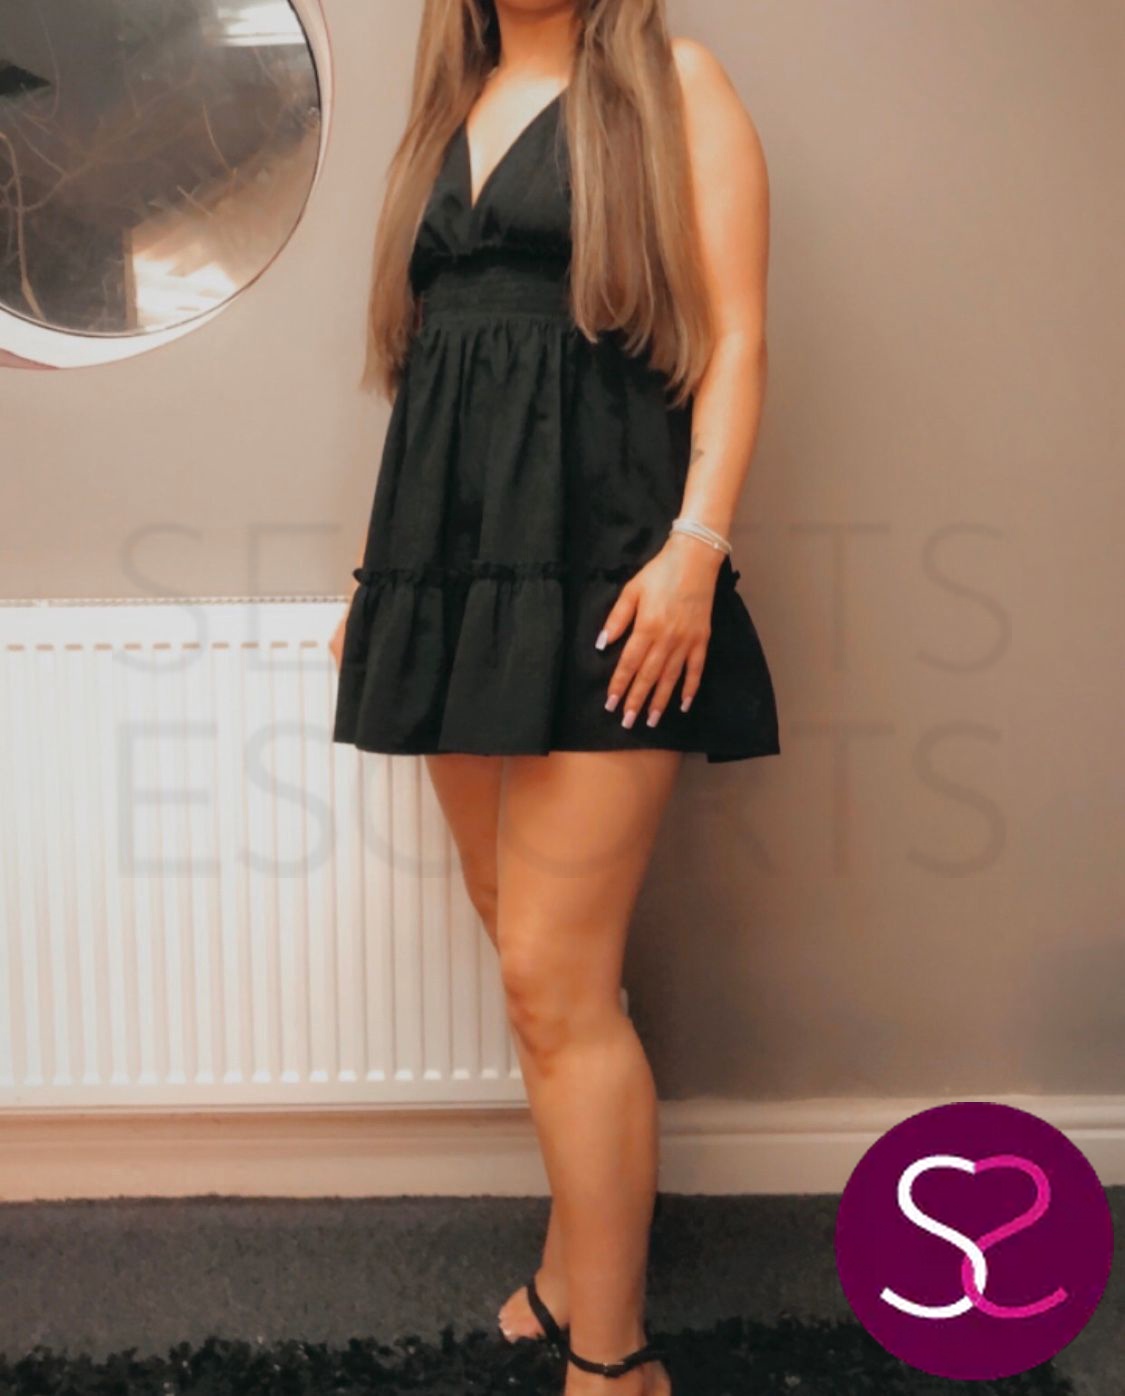 FRANKIE IS A SIZE 6 LITTLE DOLL, WITH LONG SILKY HAIR AND A STUNNINGLY PRETTY FACE!